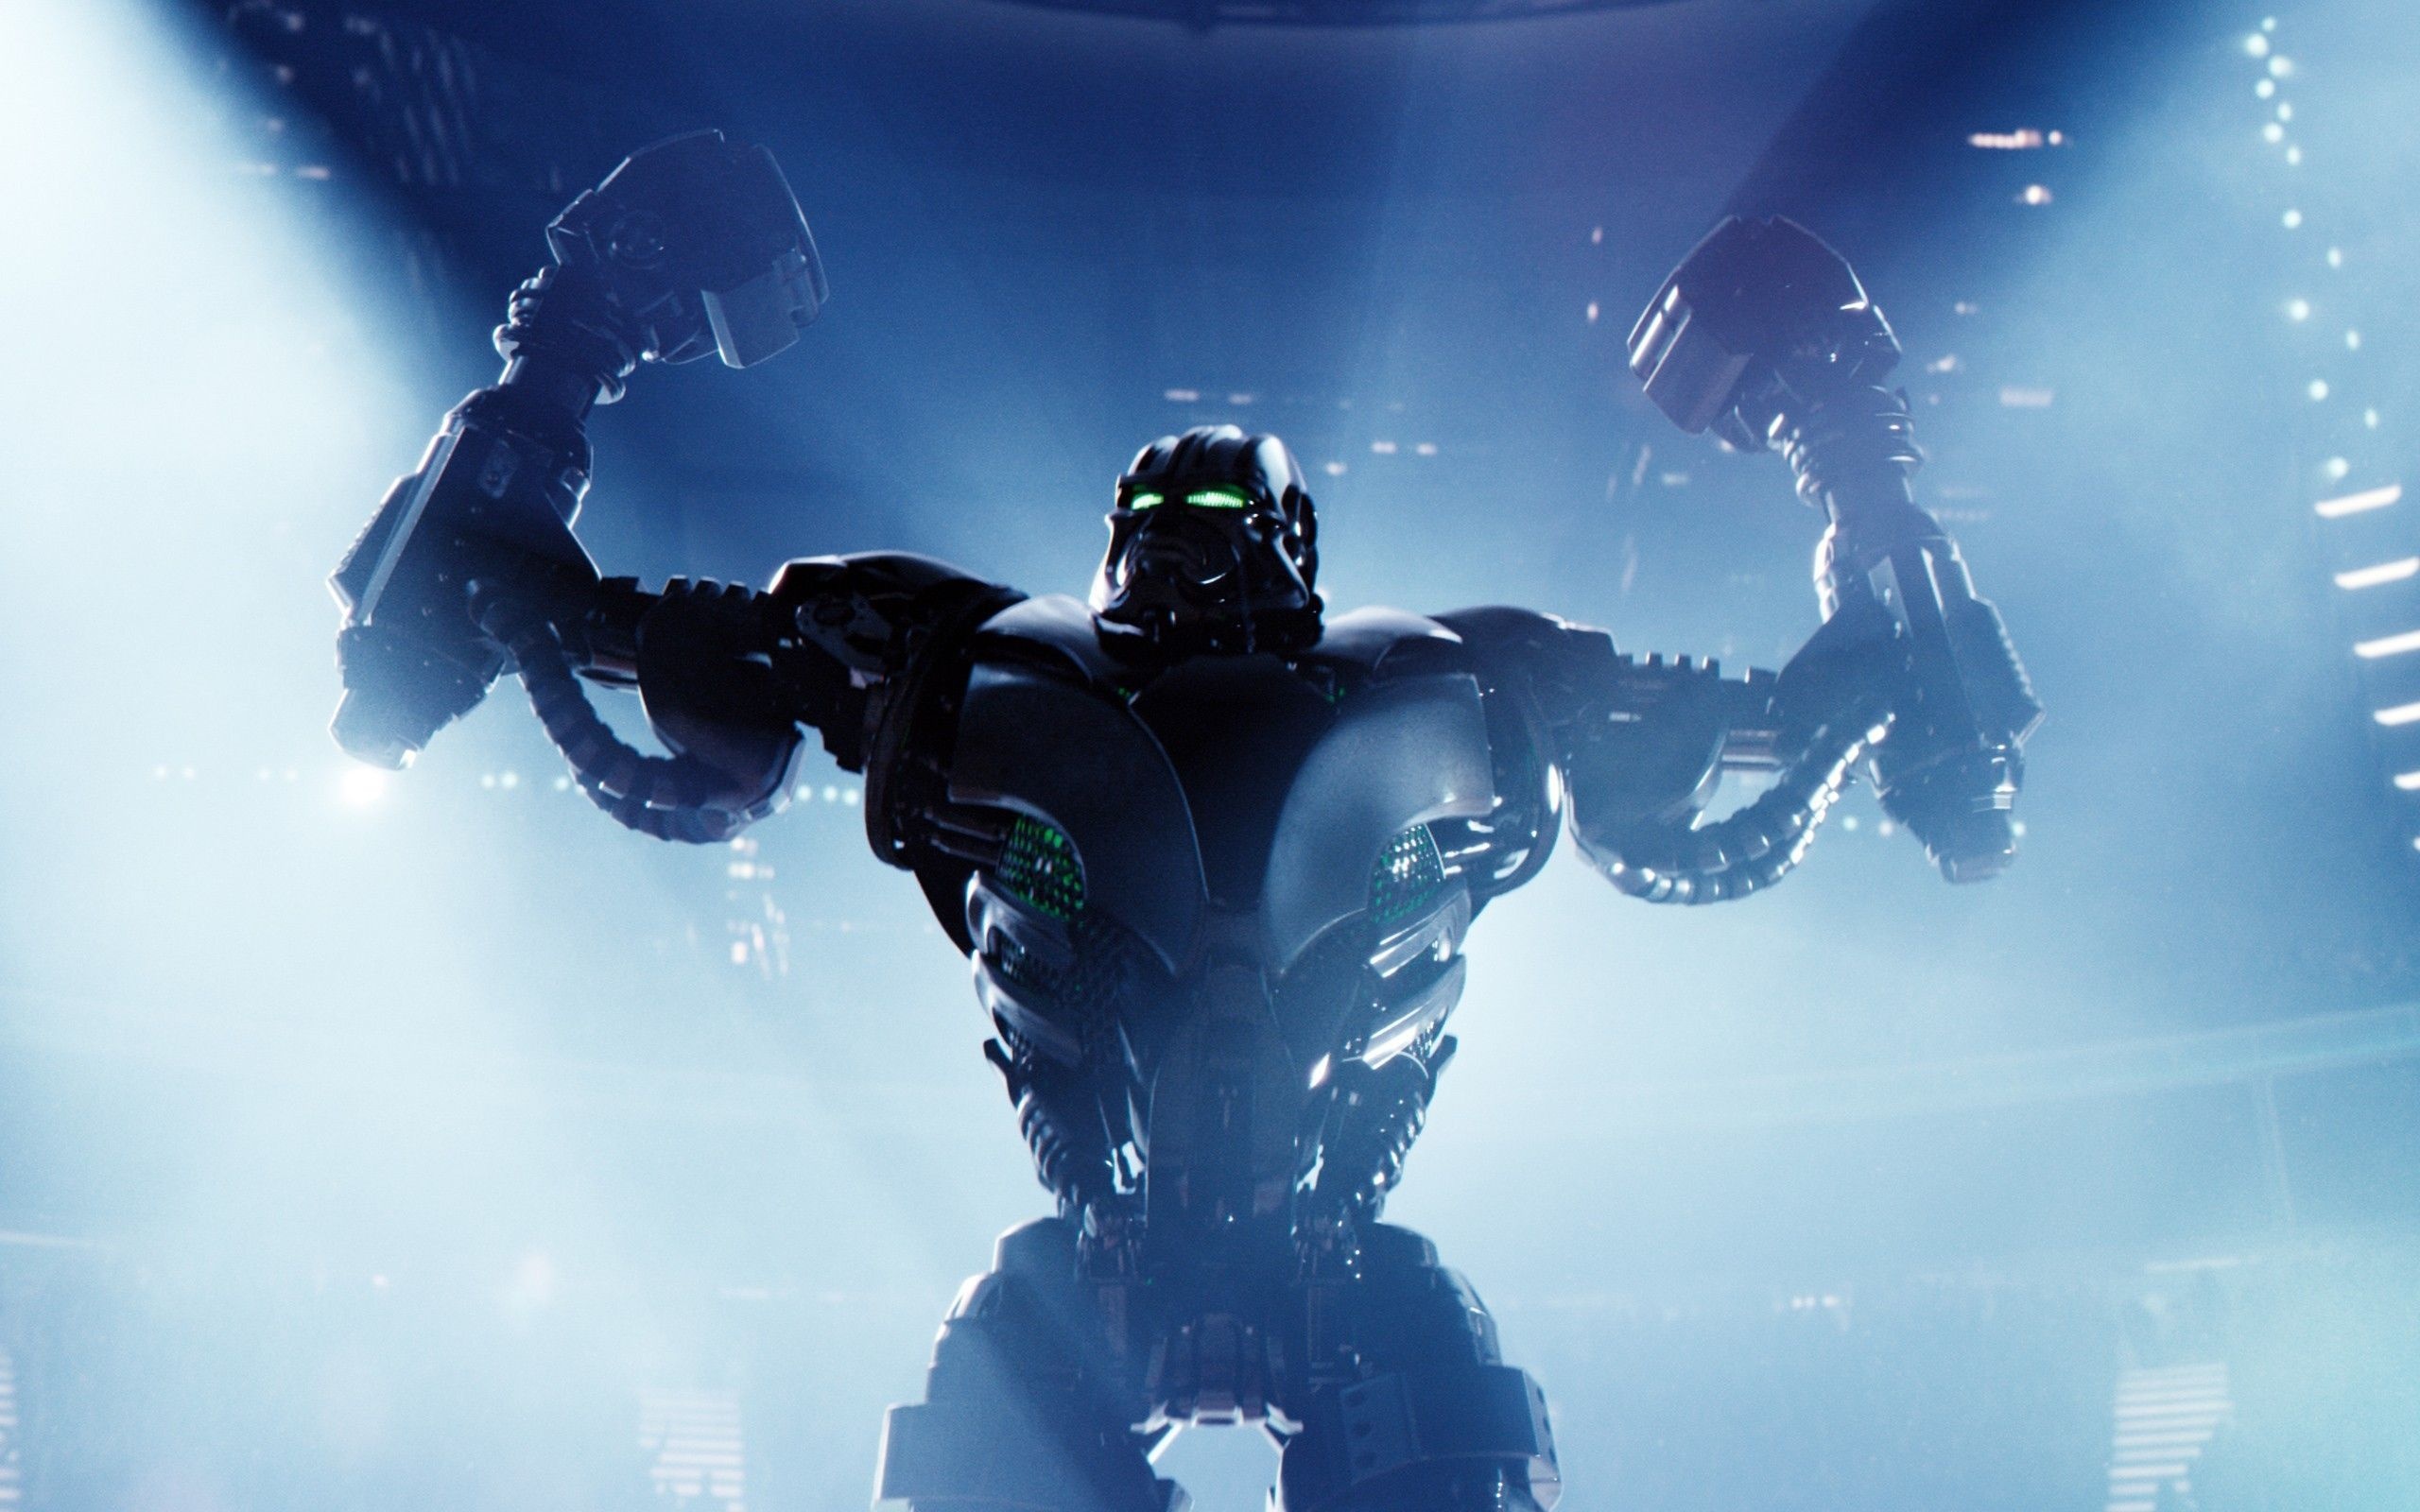 Real Steel: Sci-fi action drama, Directed by Shawn Levy. 2560x1600 HD Wallpaper.